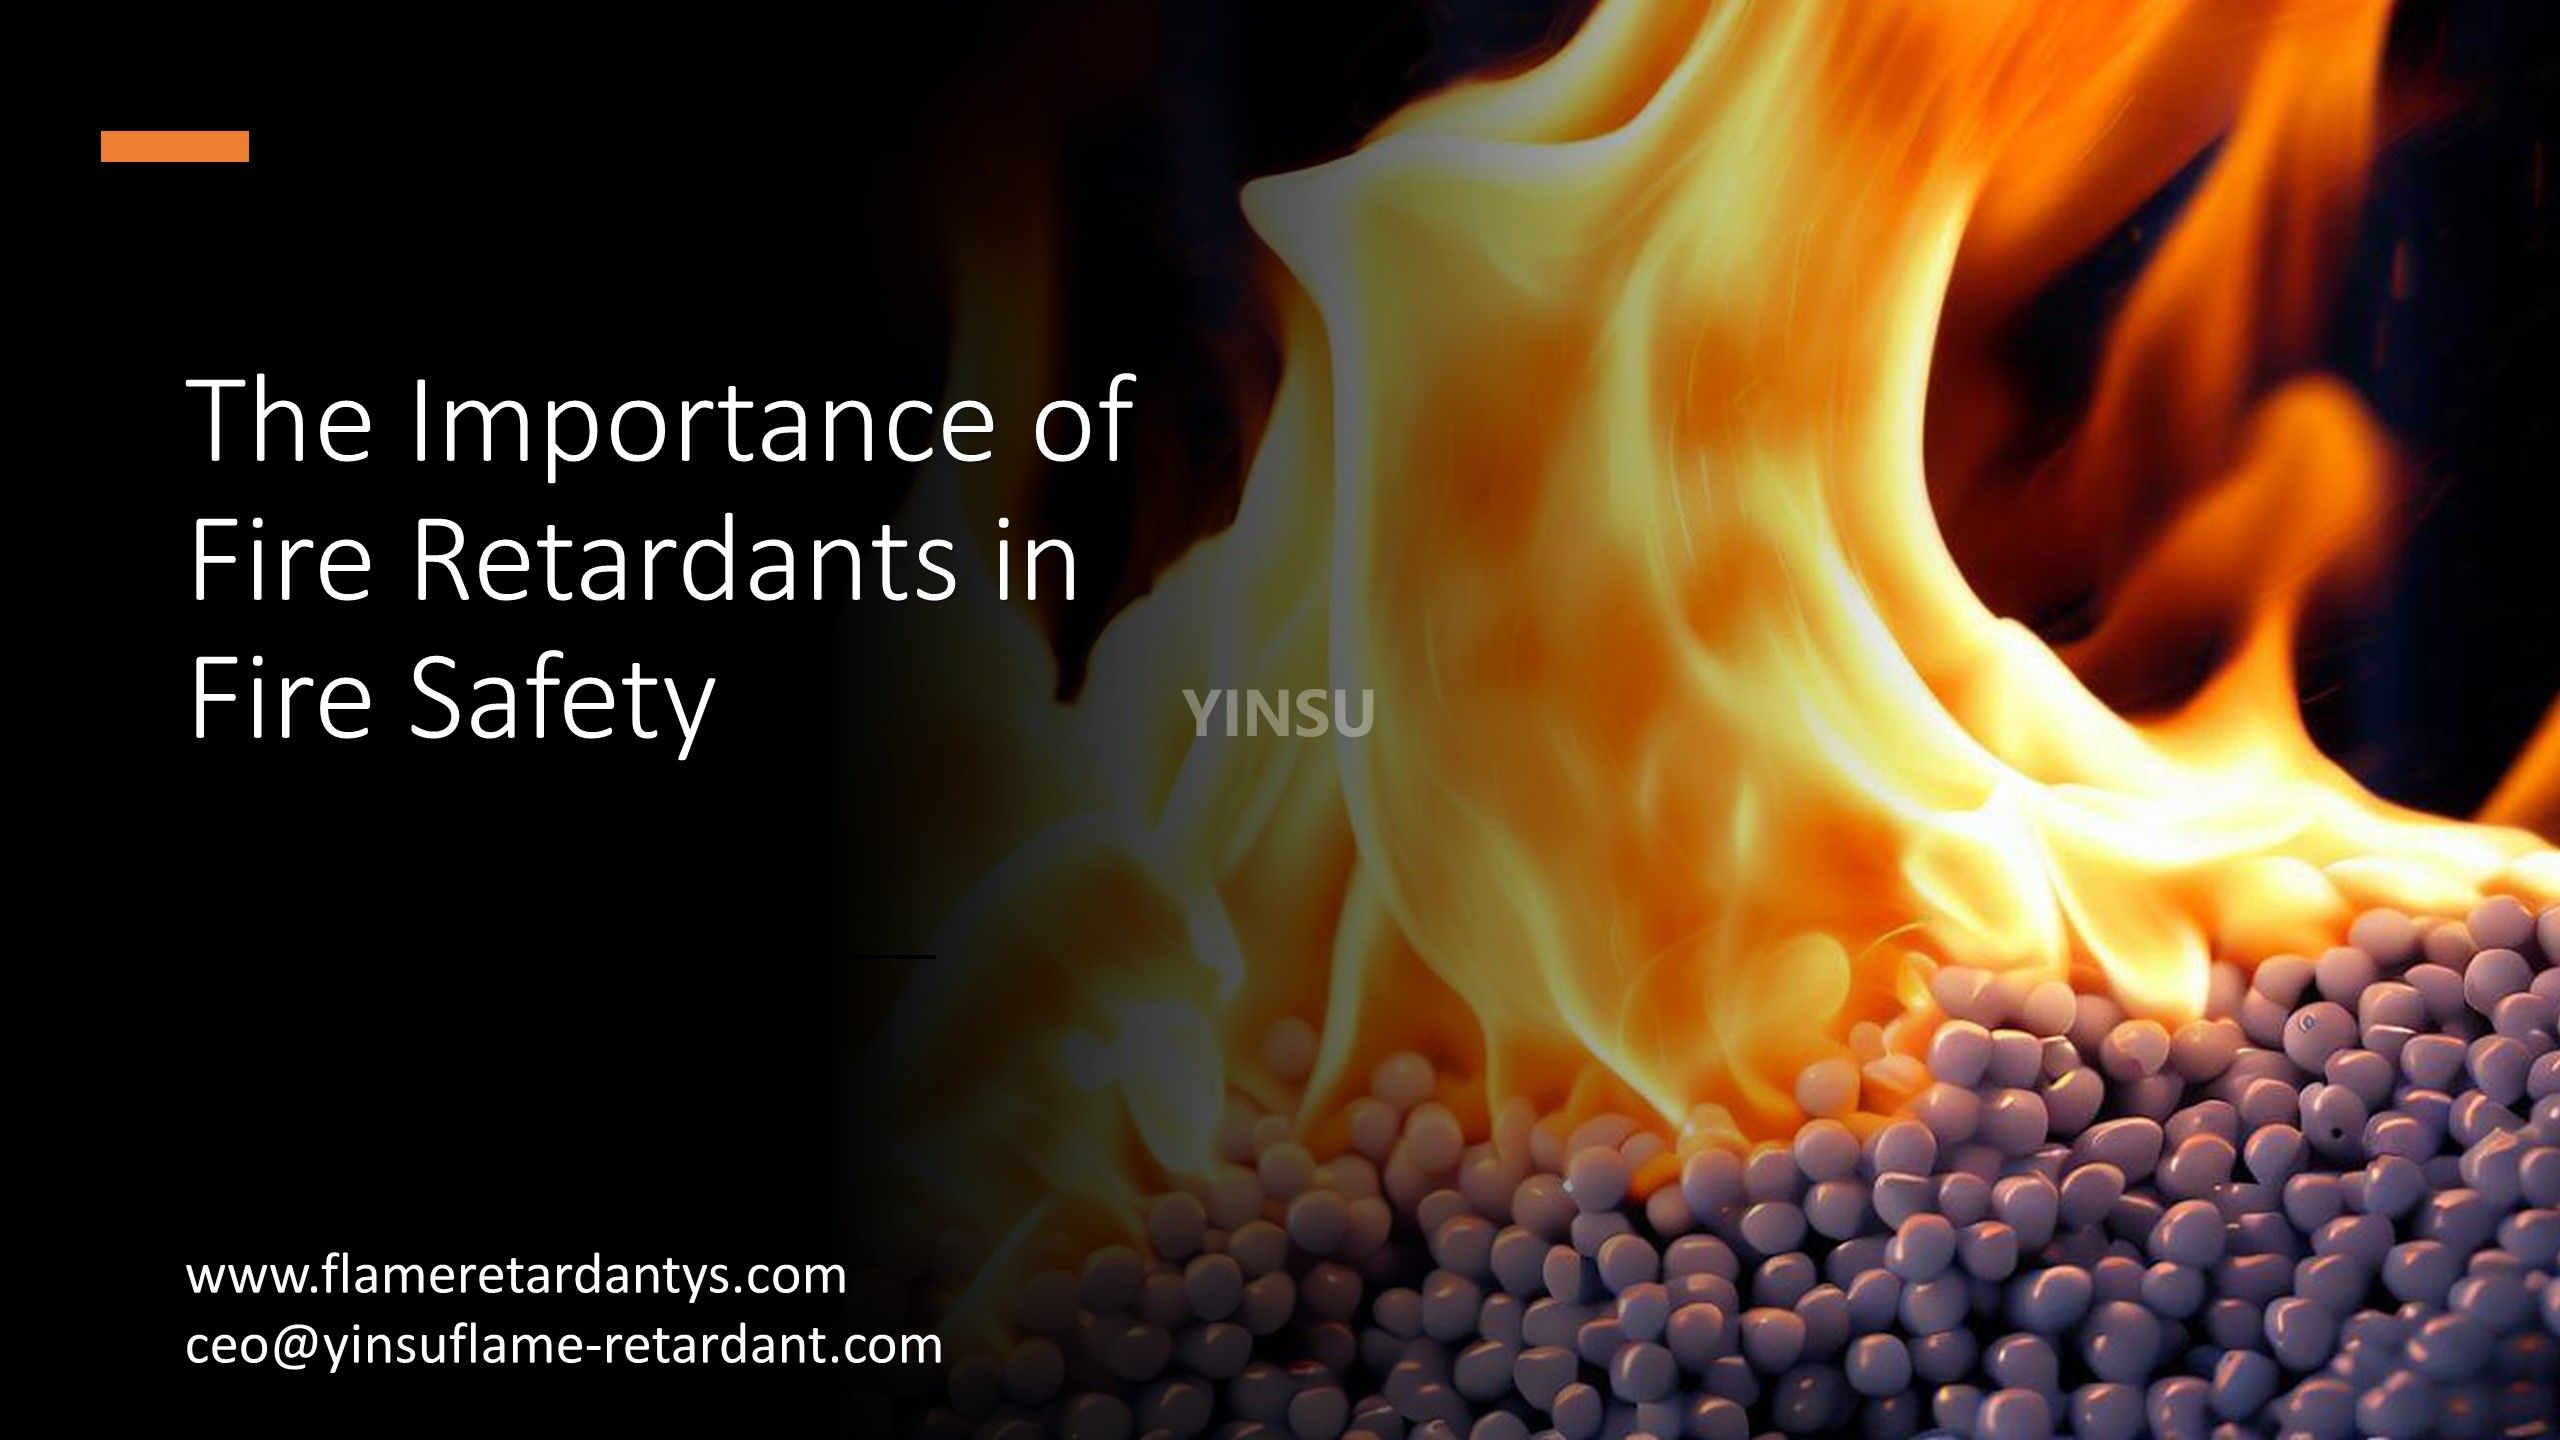 The Importance of Fire Retardants in Fire Safety